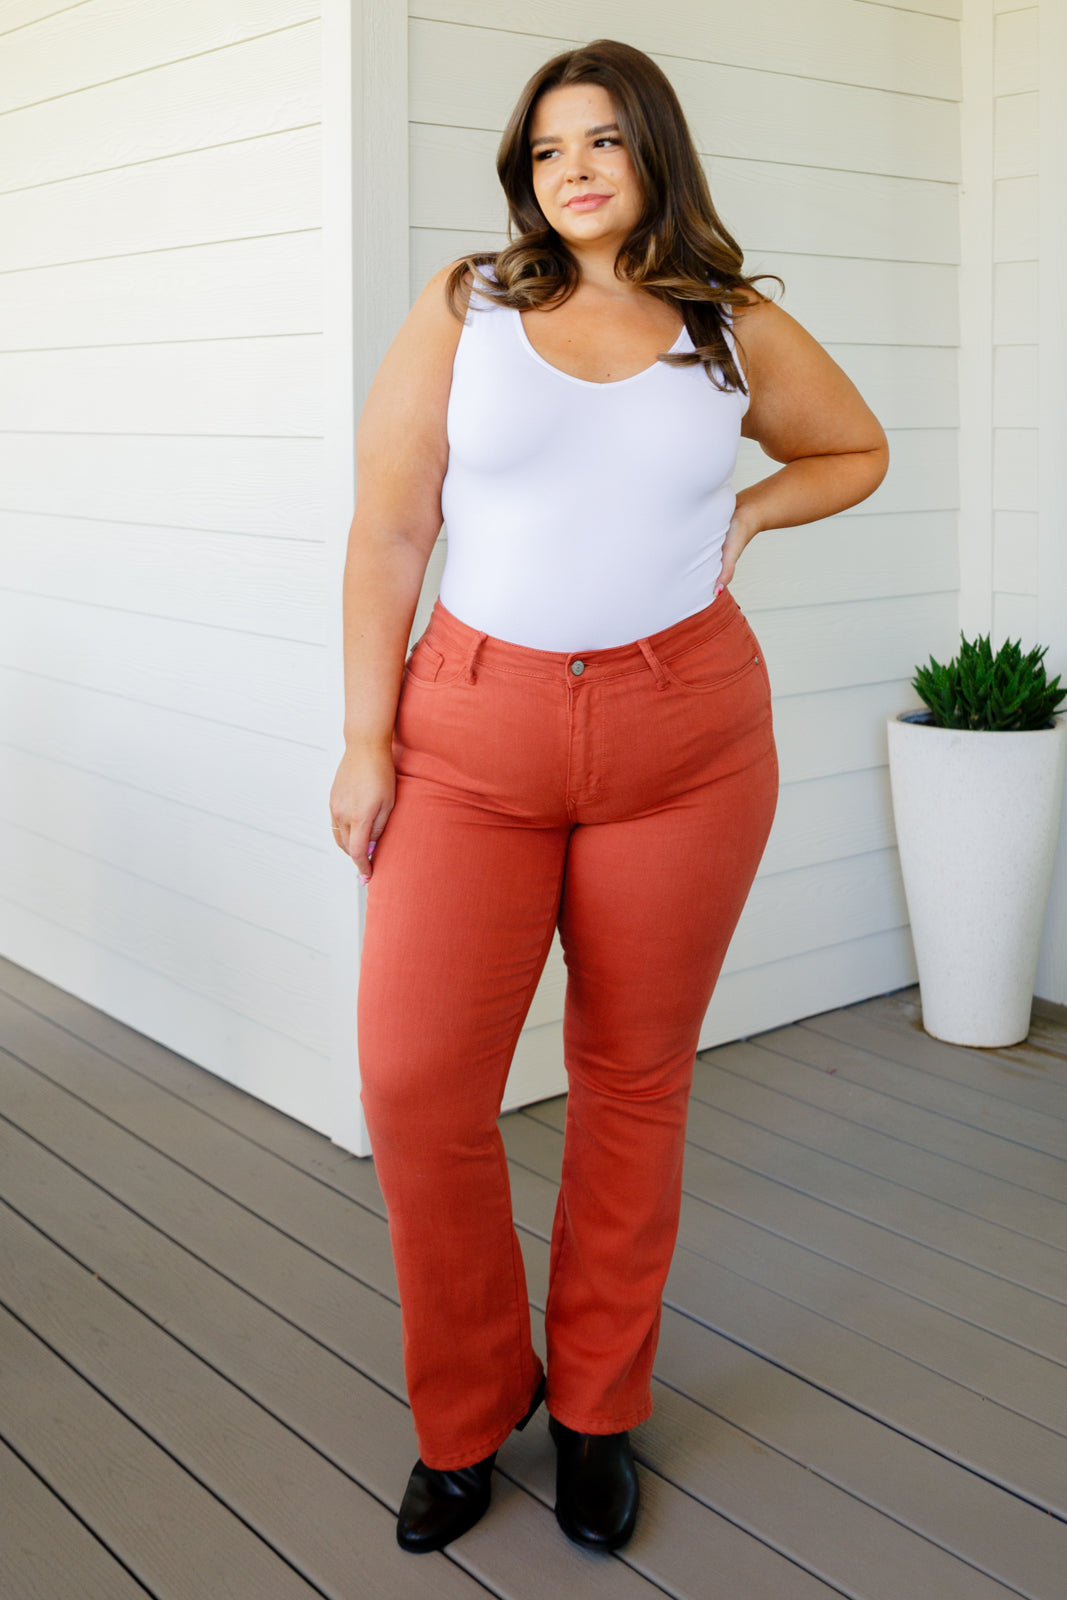 Judy Blue Autumn Mid Rise Slim Bootcut Jeans in Terracotta - Lola Cerina Boutique